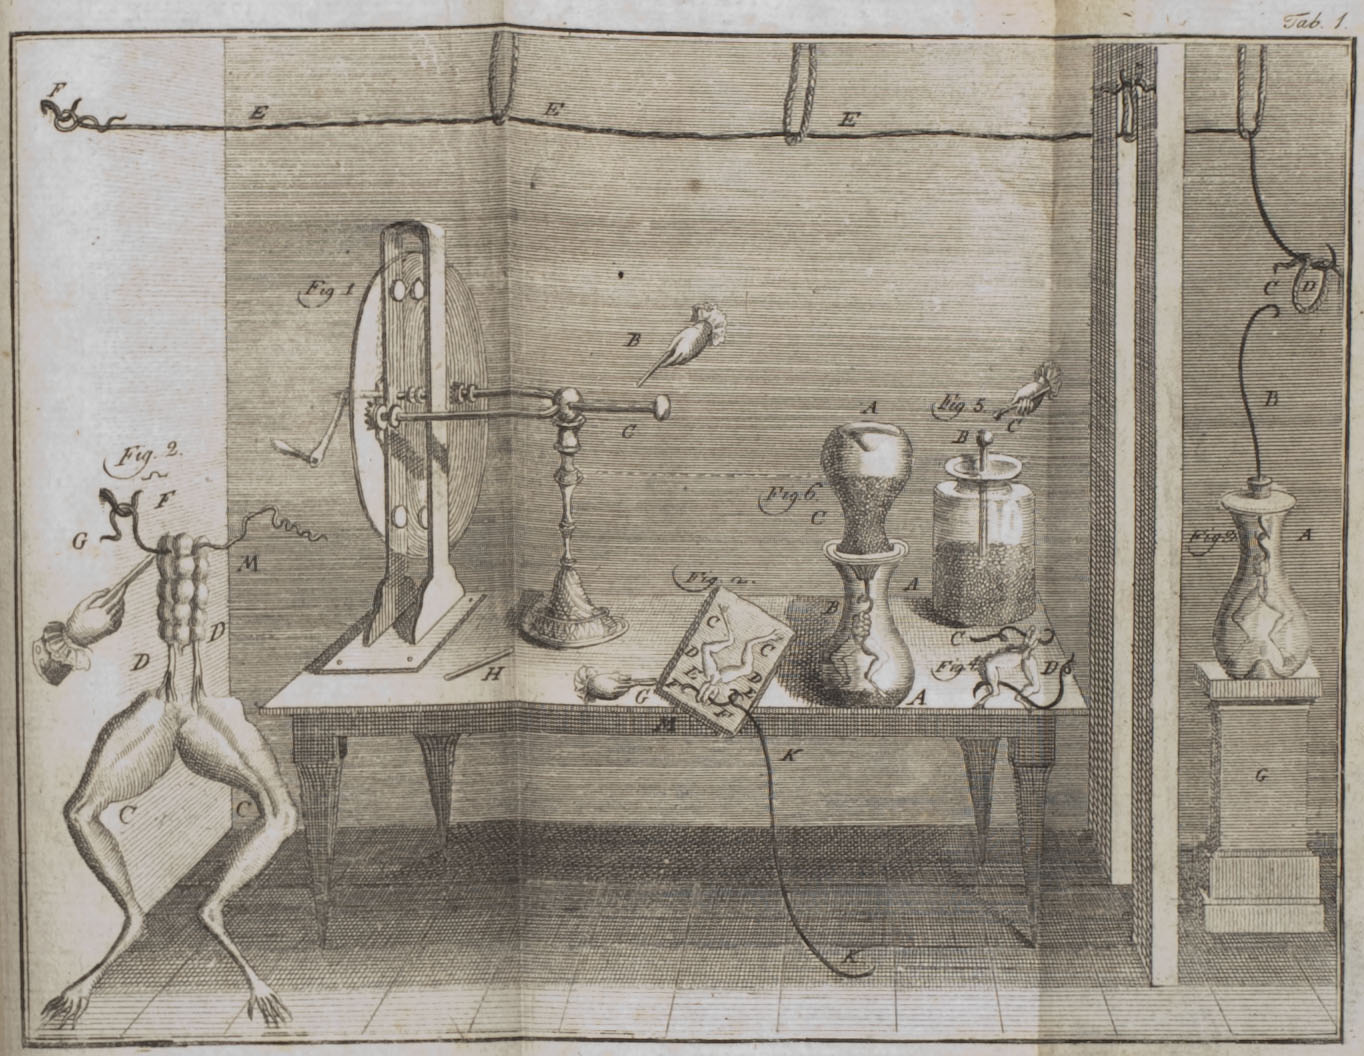 An illustration from Galvani's 1791 publication that shows some of the devices (along with frog preparations) used in his experiments.